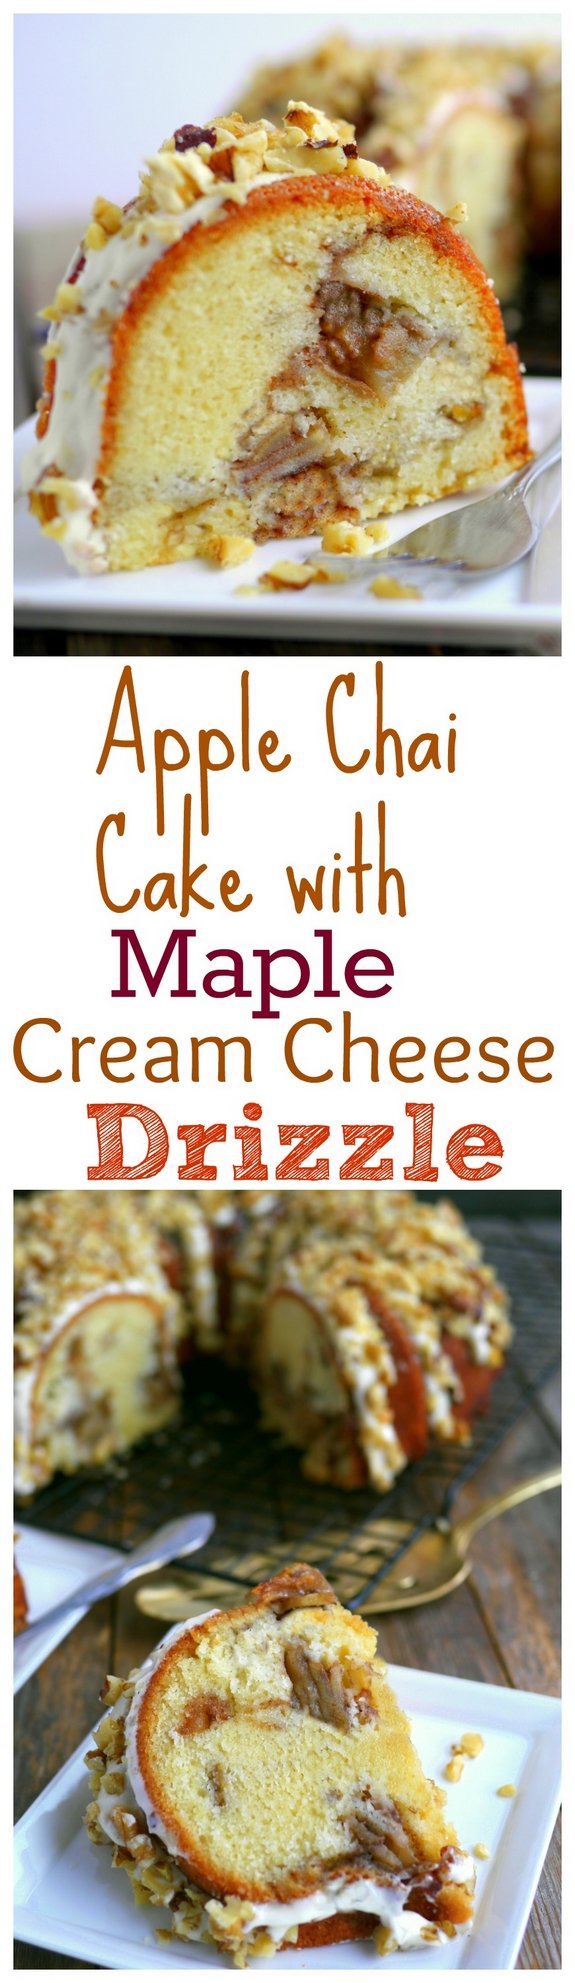 Apple Chai Cake with Maple Cream Cheese Drizzle